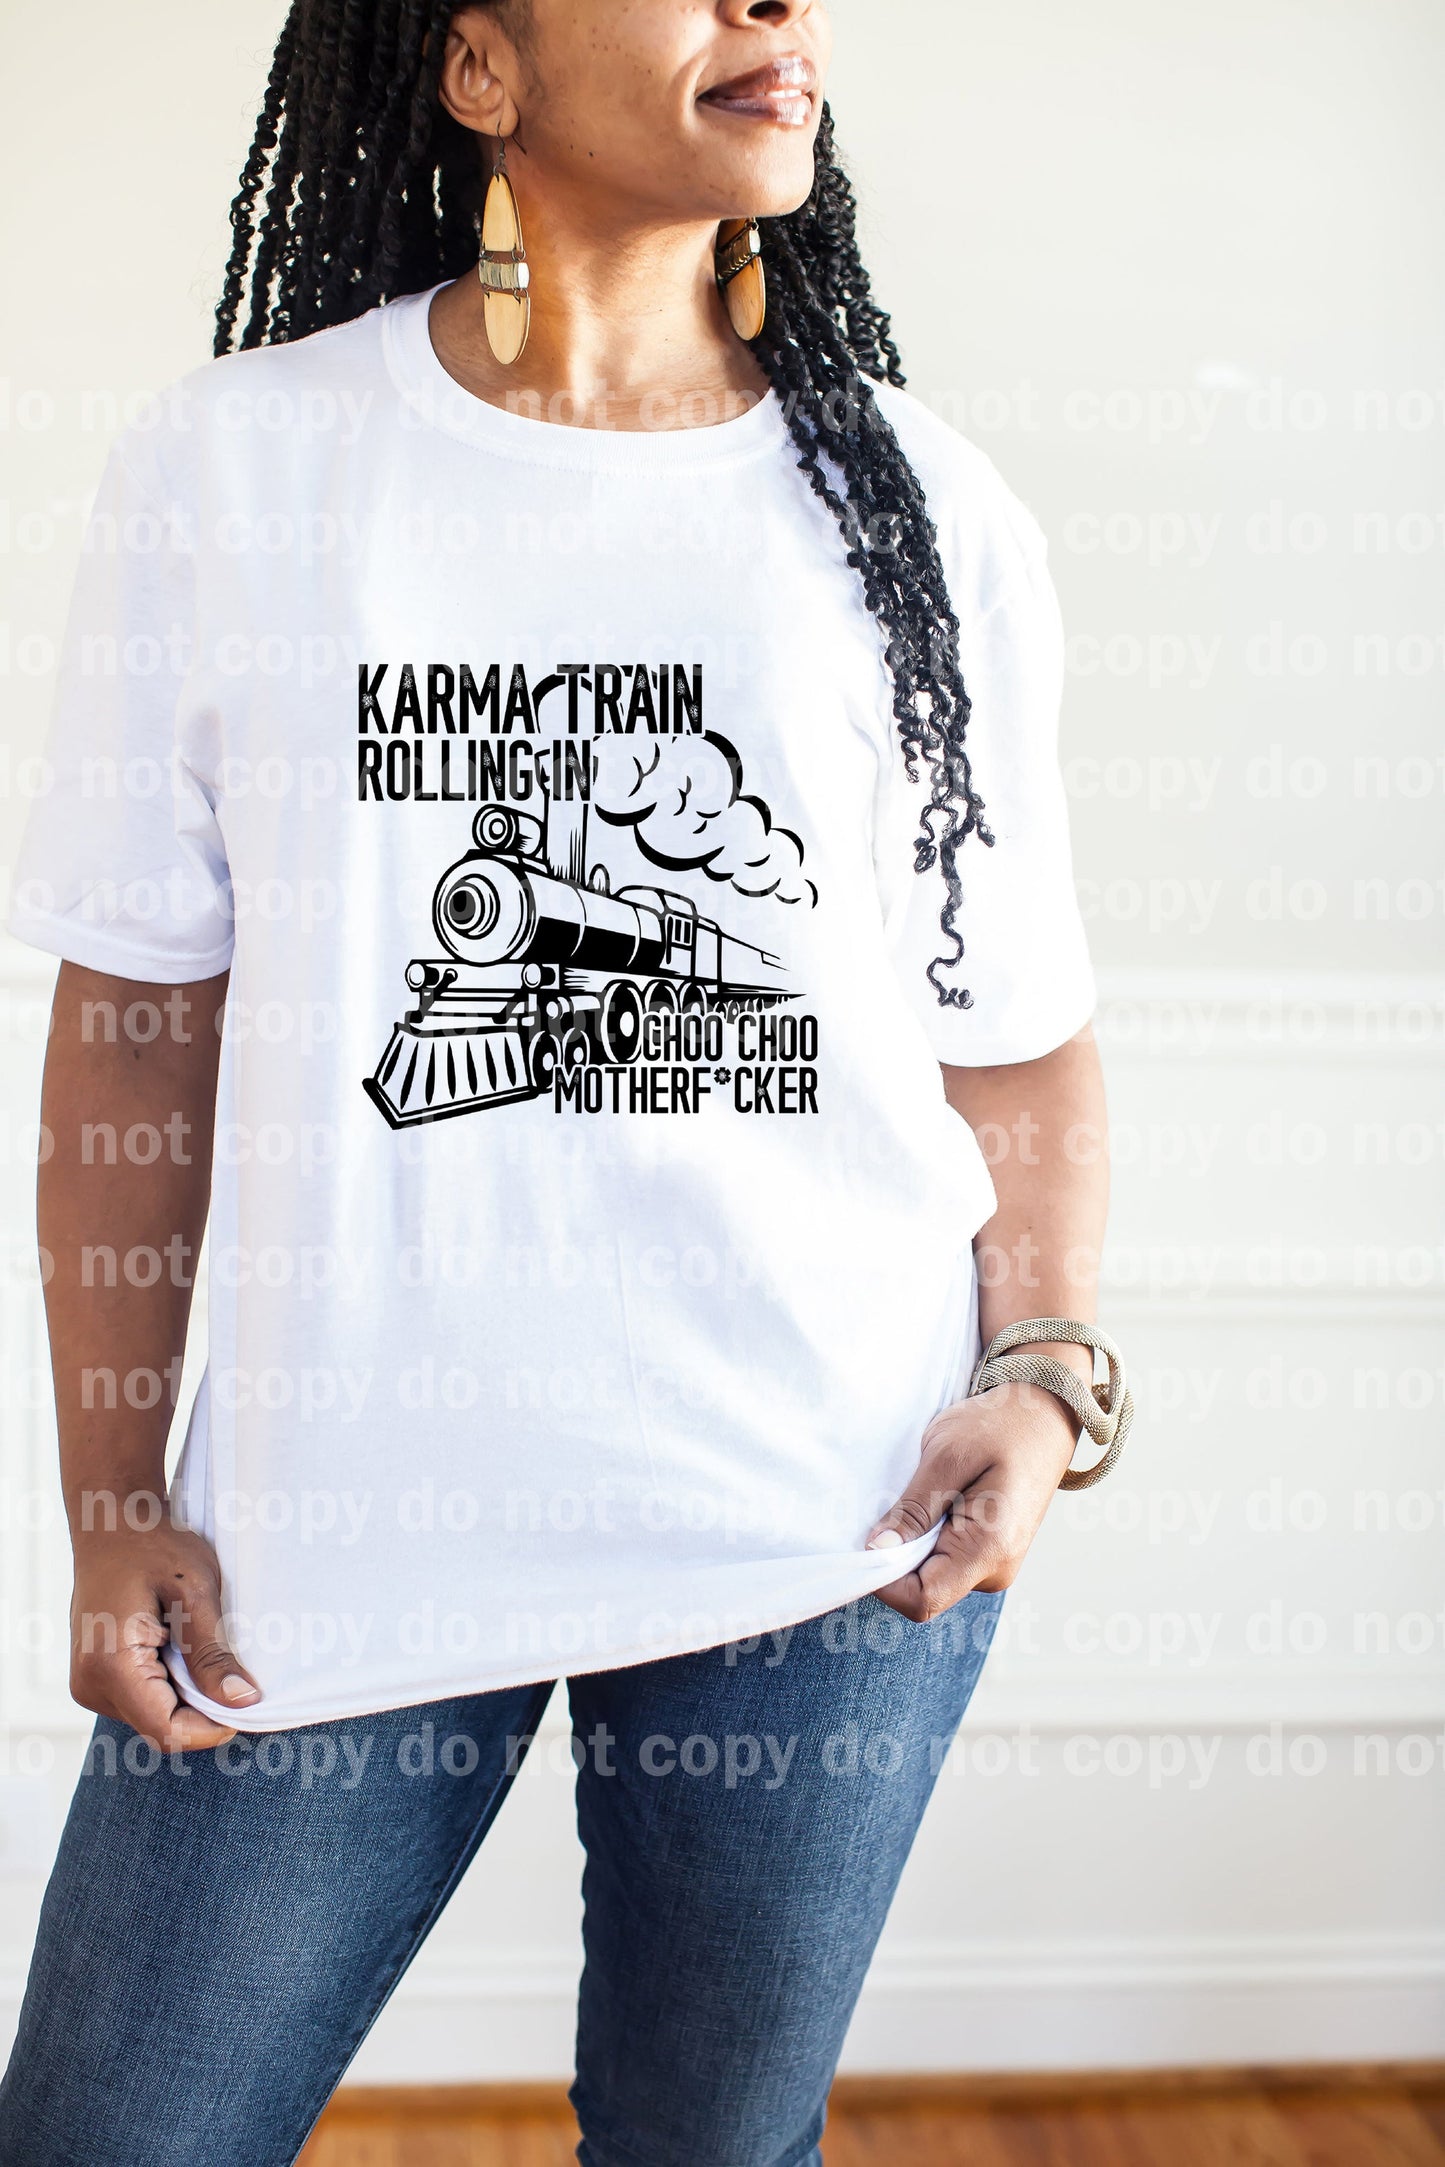 Karma Train Rolling In Dream Print or Sublimation Print